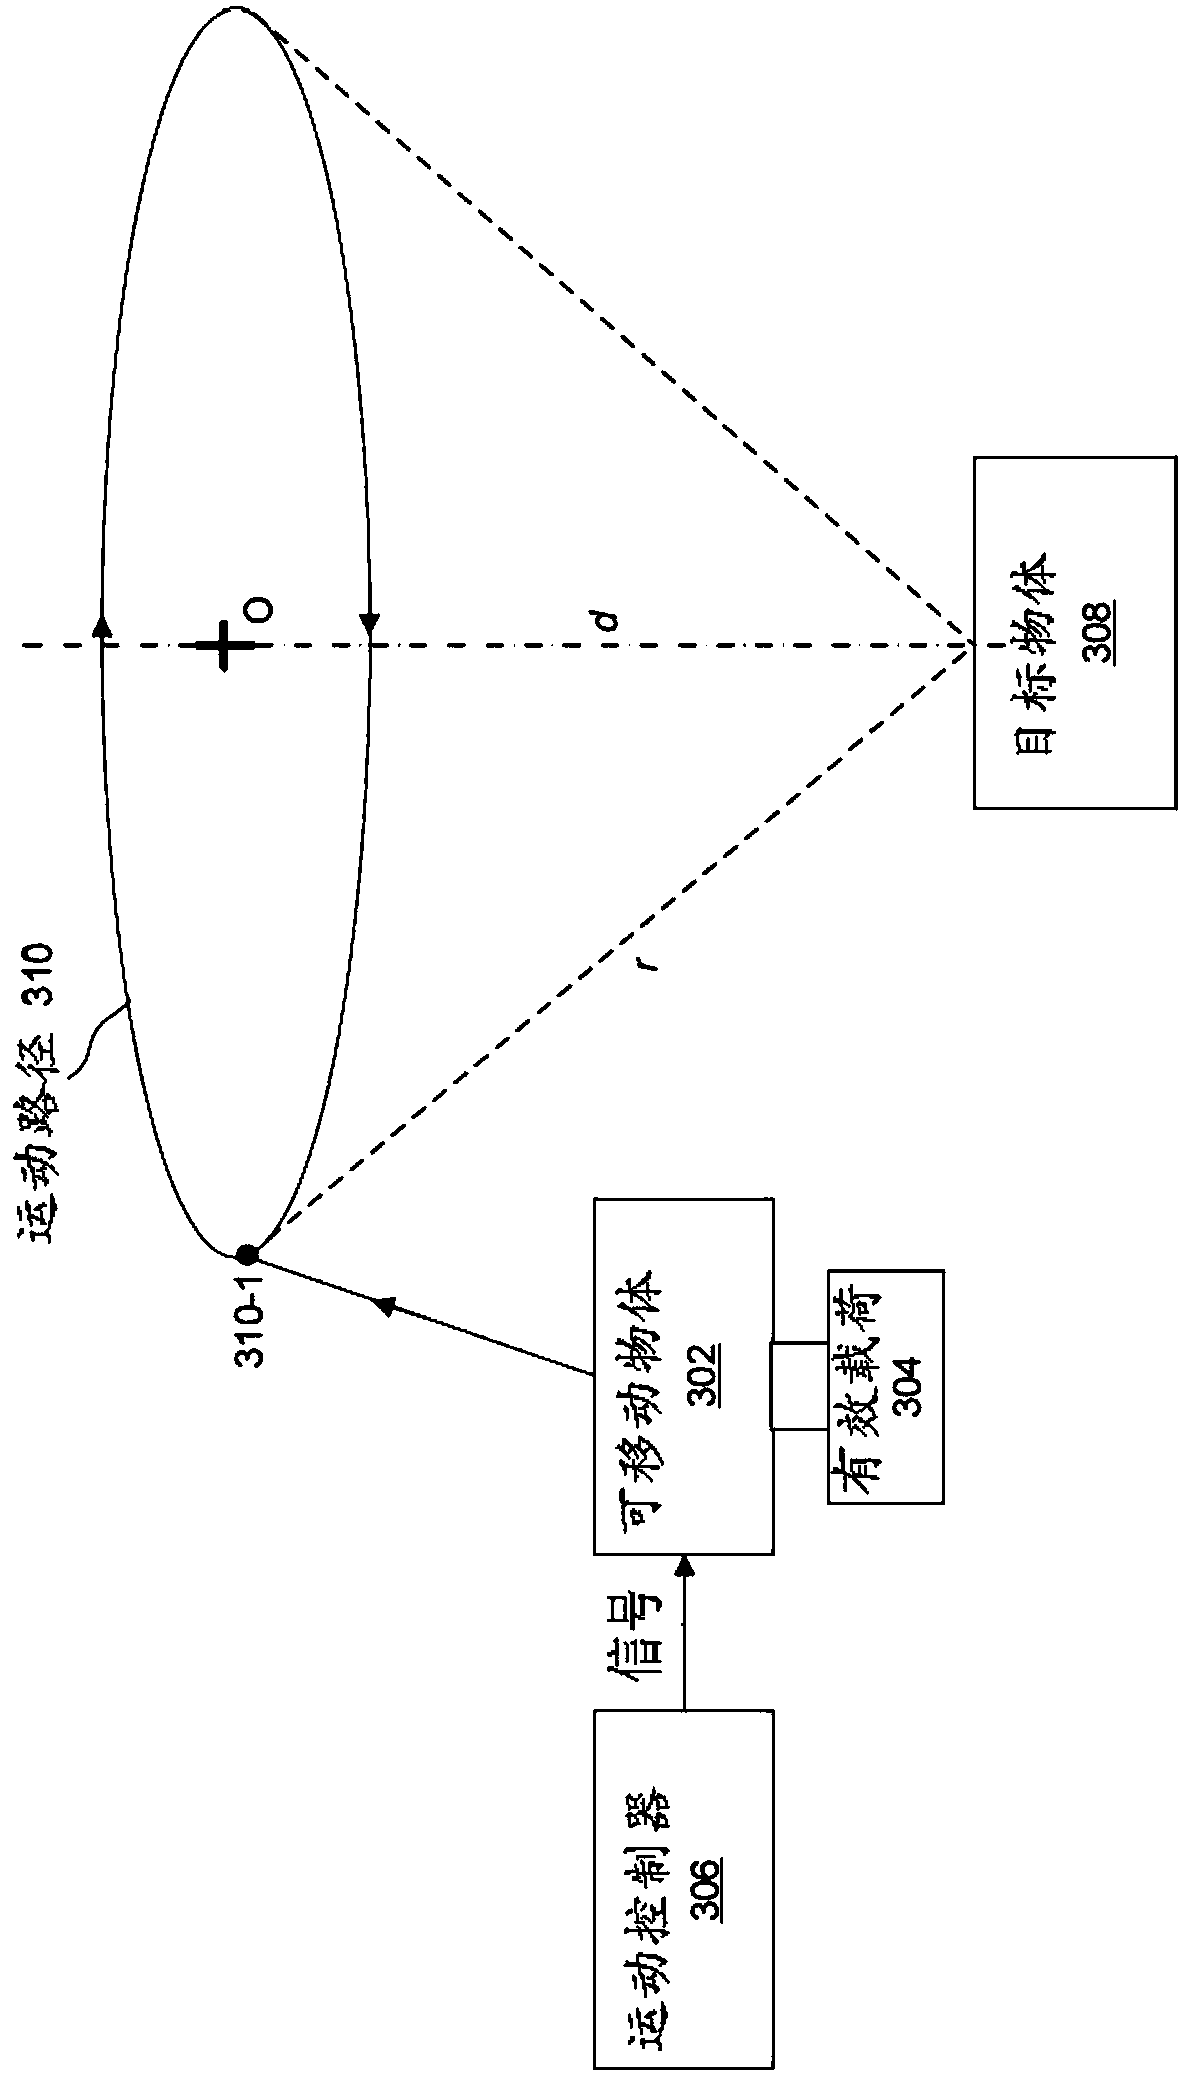 Systems and methods for UAV flight control